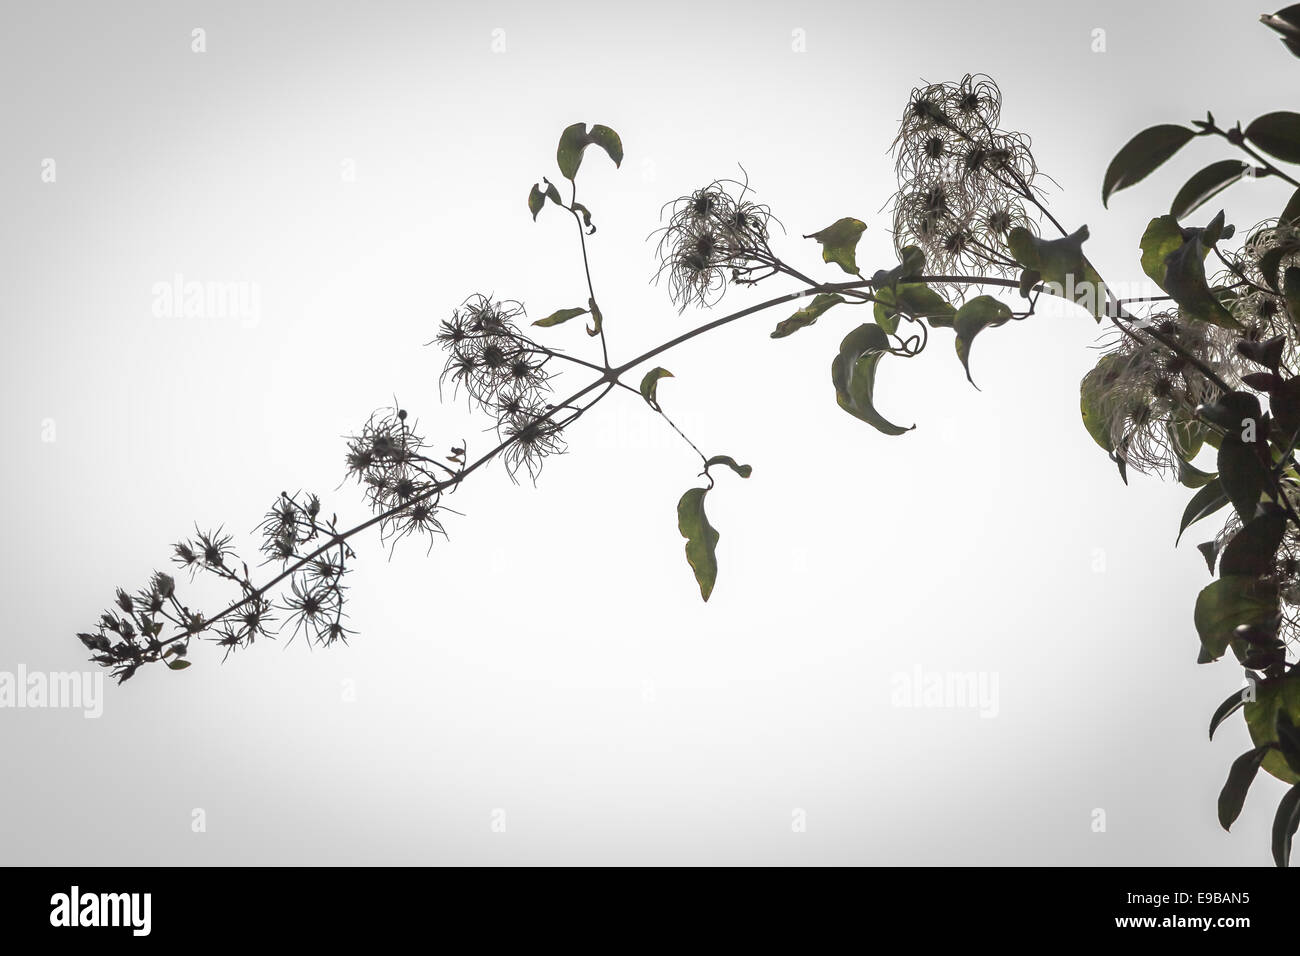 Wild Clamatis, Ranunculaceae family, tree branch detail, showing silhouette of intricate tracery of leaves and blossoms. Native of Easter Australia. Stock Photo